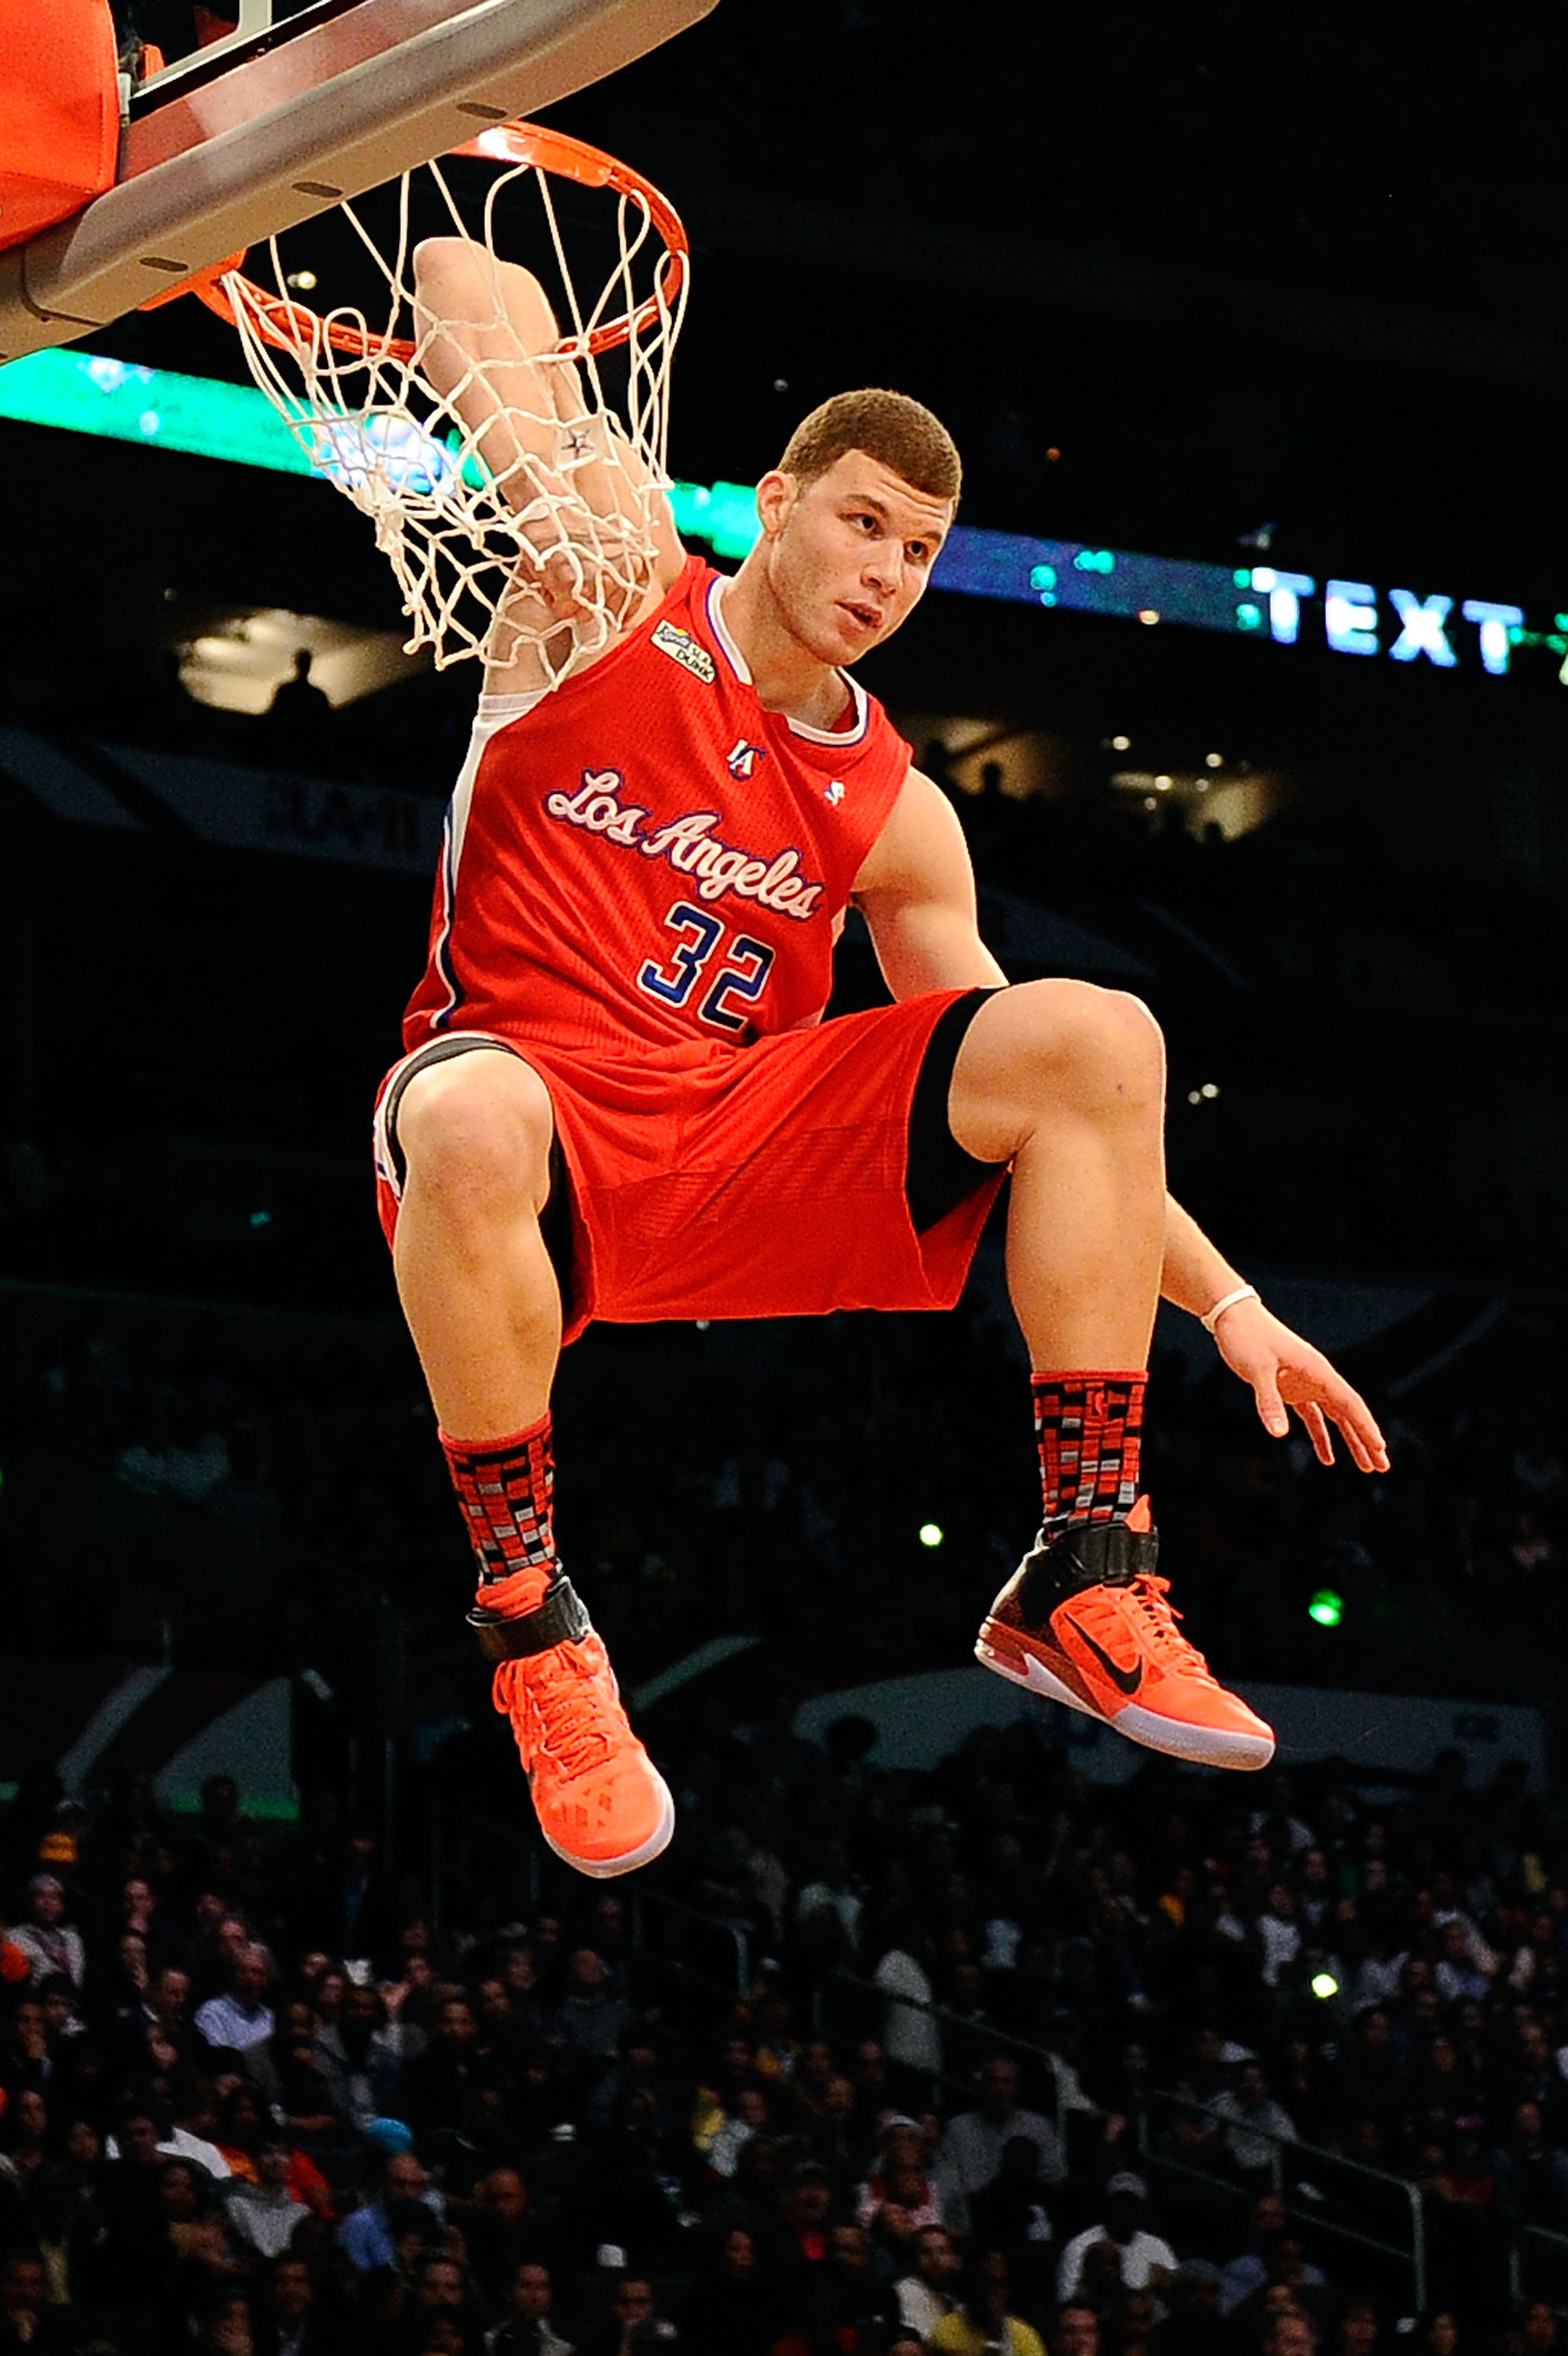 Nba All Star Dunk Contest Grades For Blake Griffin And Co Bleacher Report Latest News Videos And Highlights